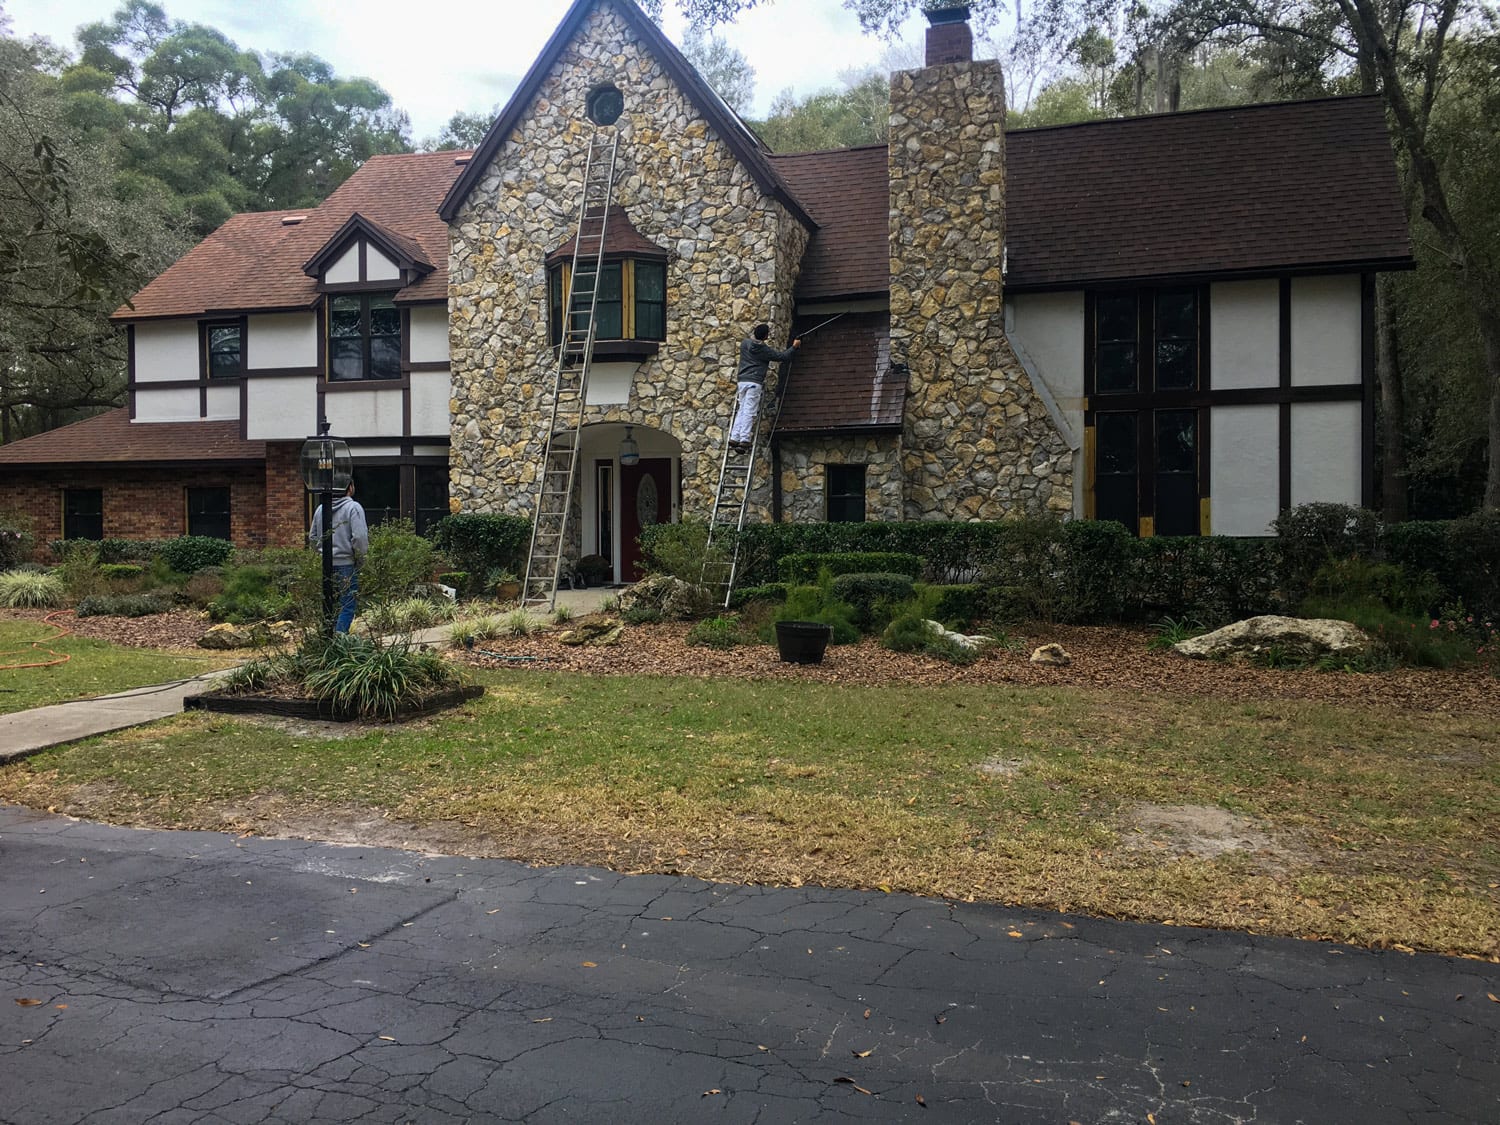 Painted house in Gainesville Florida